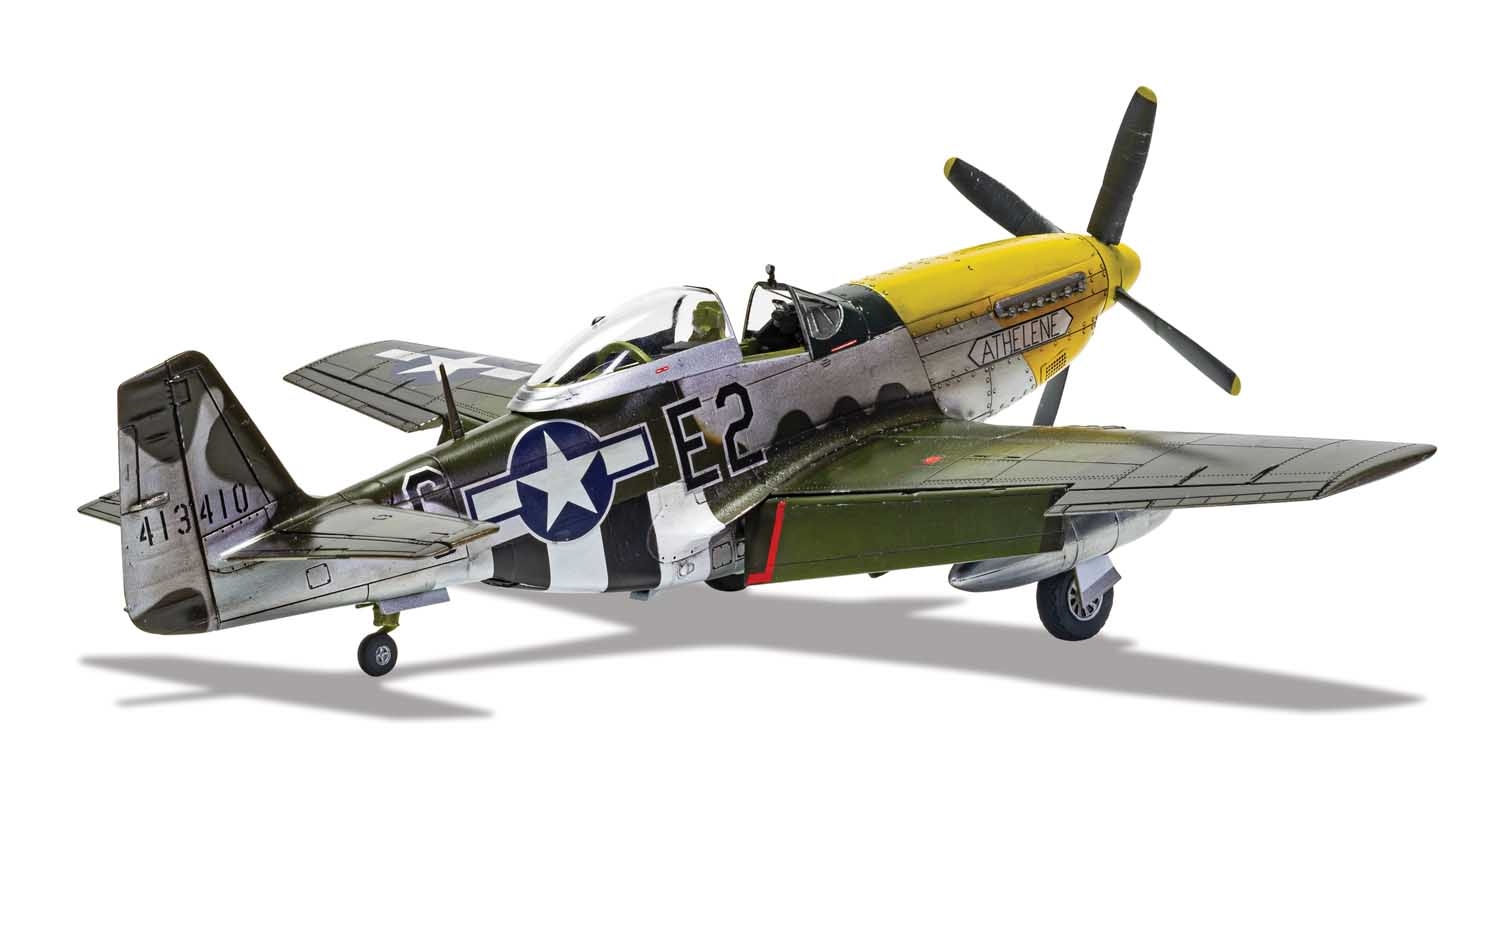 Airfix Airf05138 North American P51-D Mustang Filletless Tails 1/48 